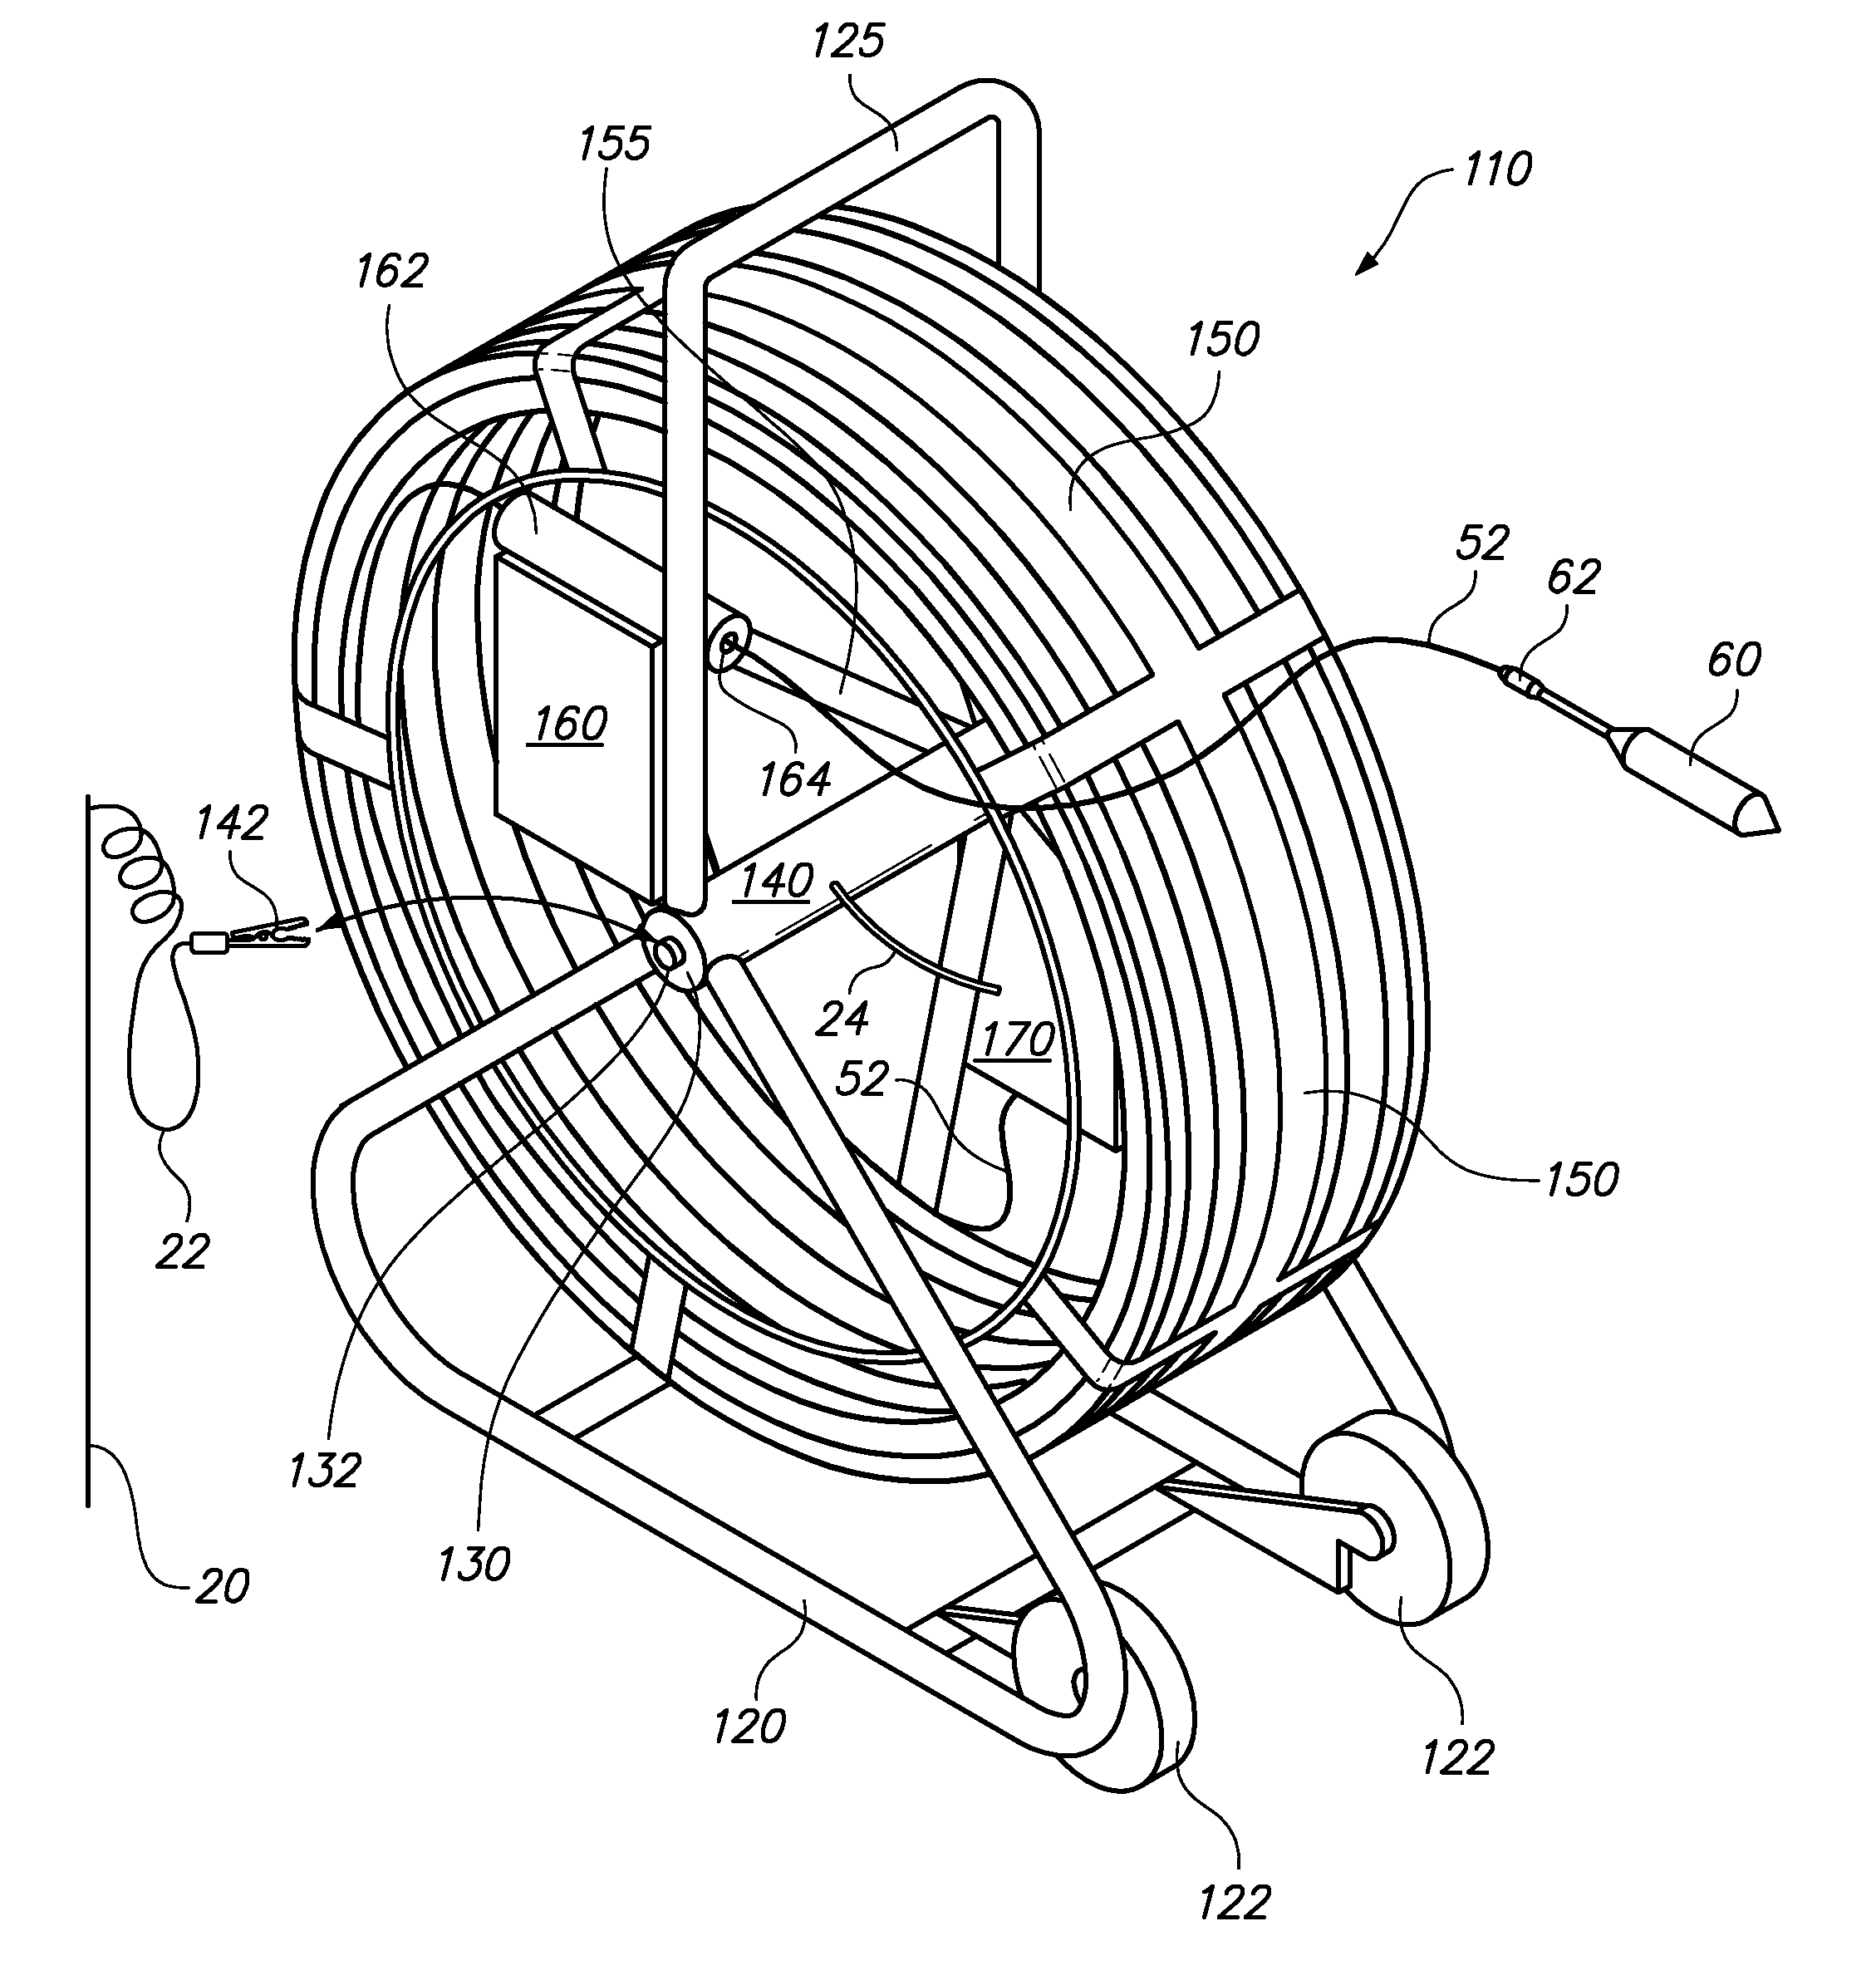 System and method for identification of pipe defects that leak